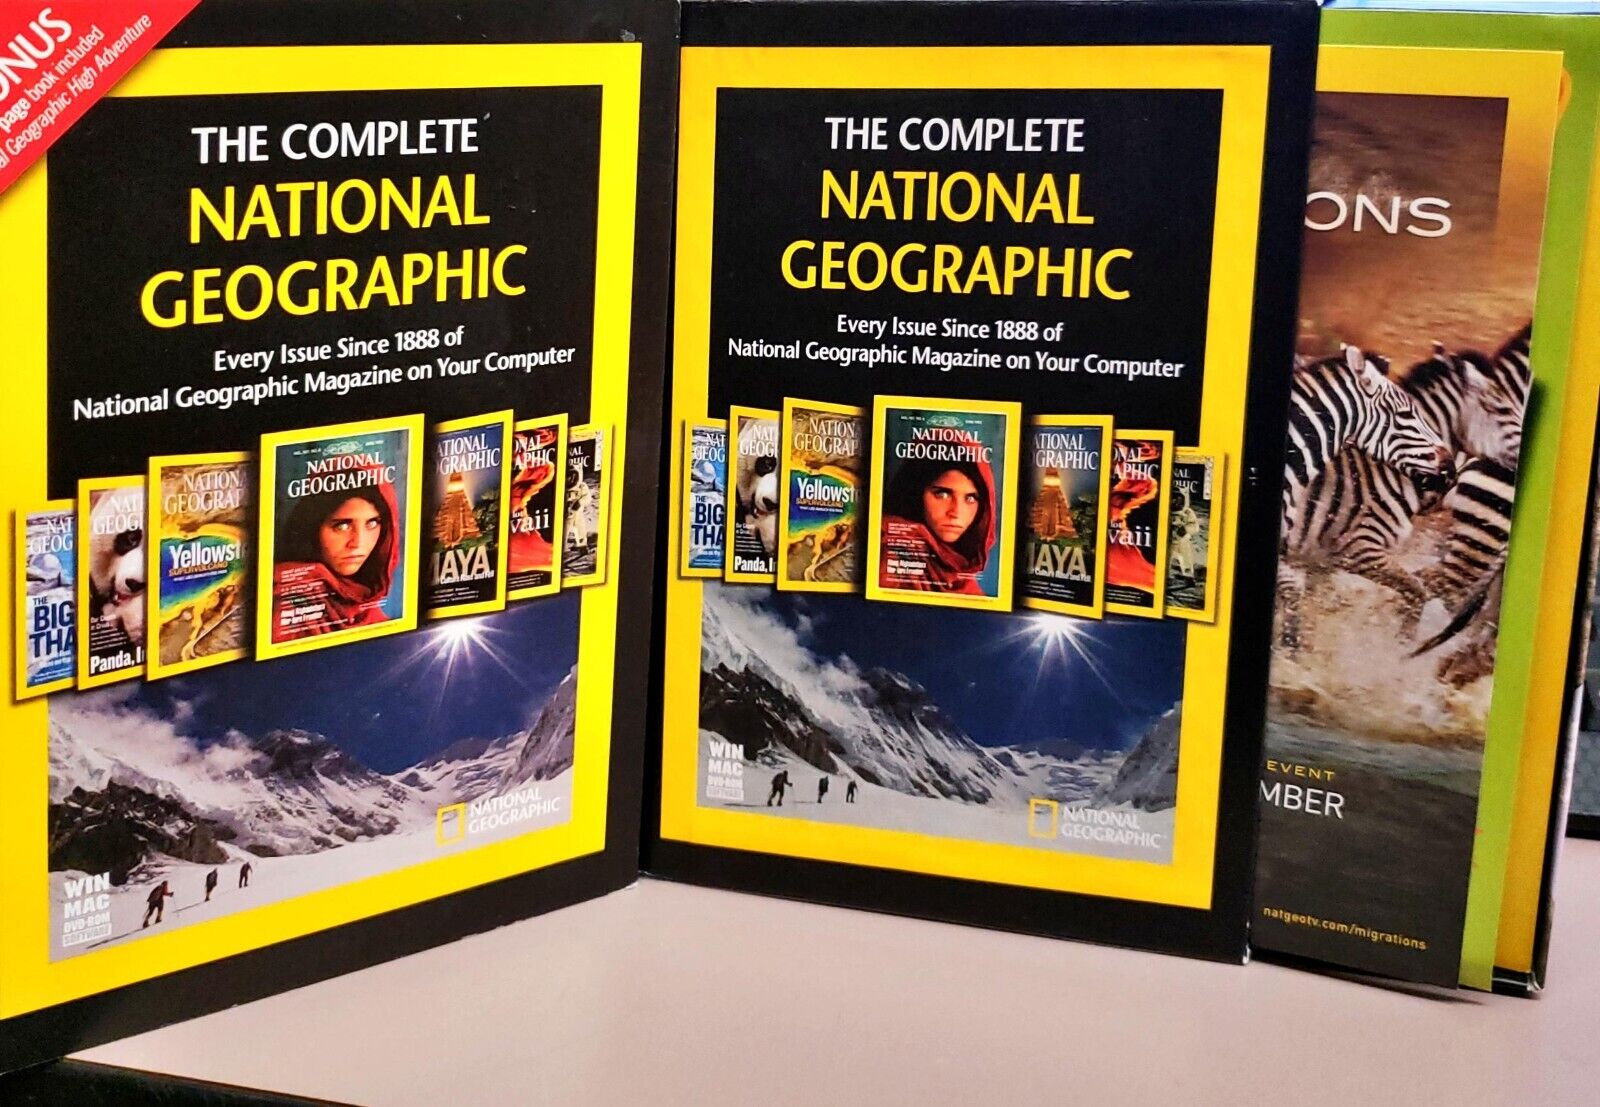 Topics Entertainment The Complete National Geographic 2 for PC, Mac